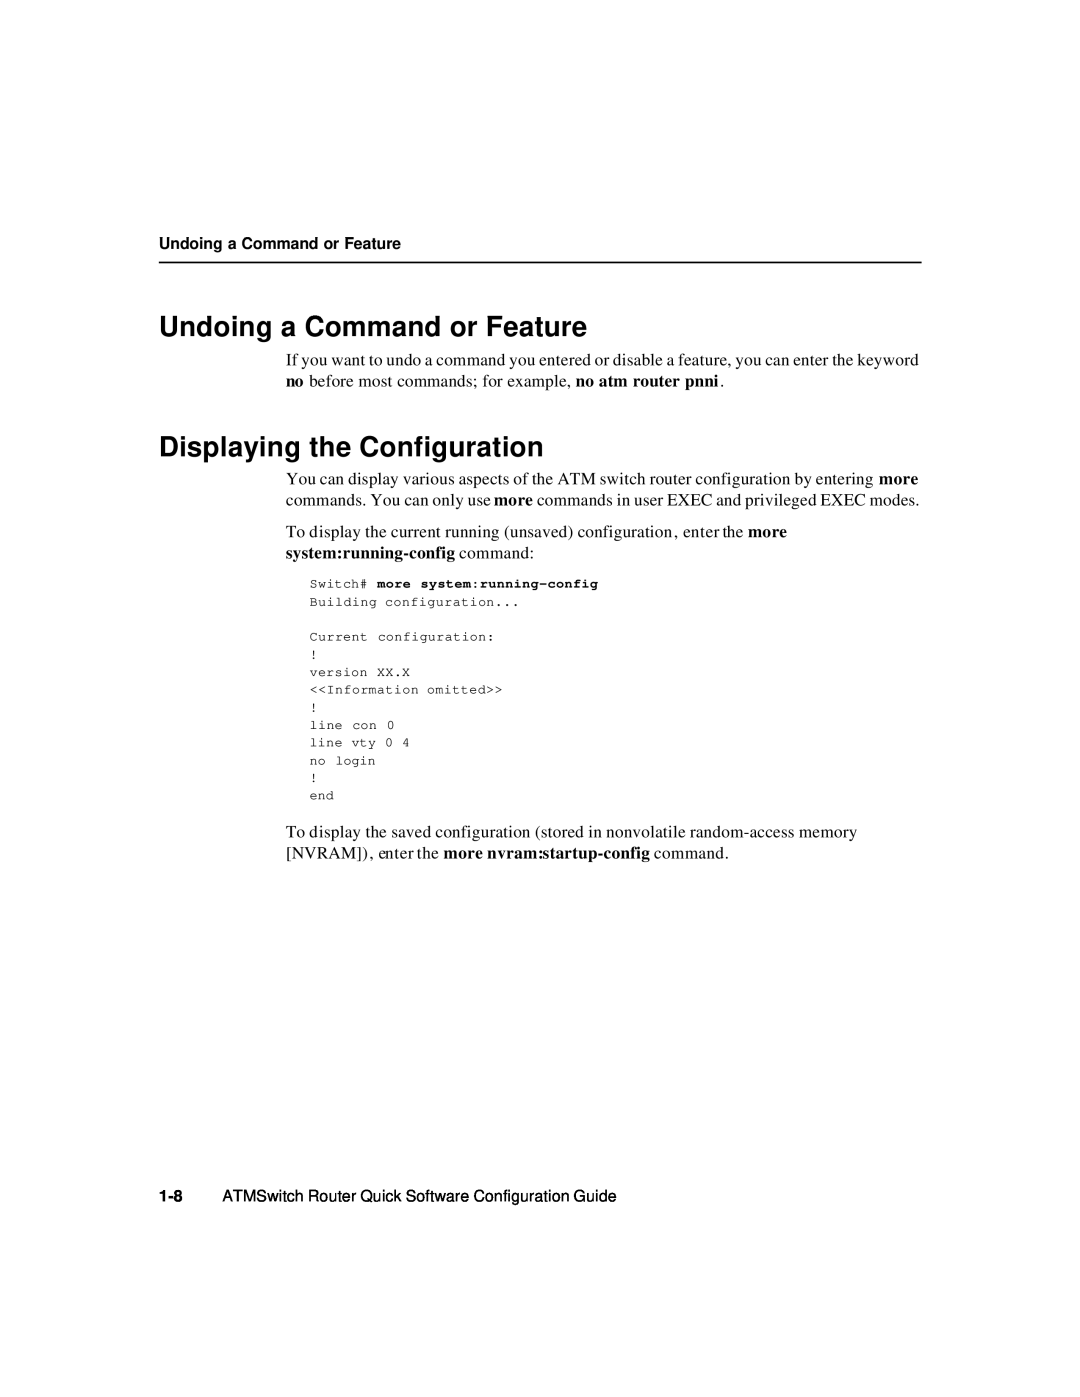 Cisco Systems 78-6897-01 manual Undoing a Command or Feature, Displaying the Configuration 